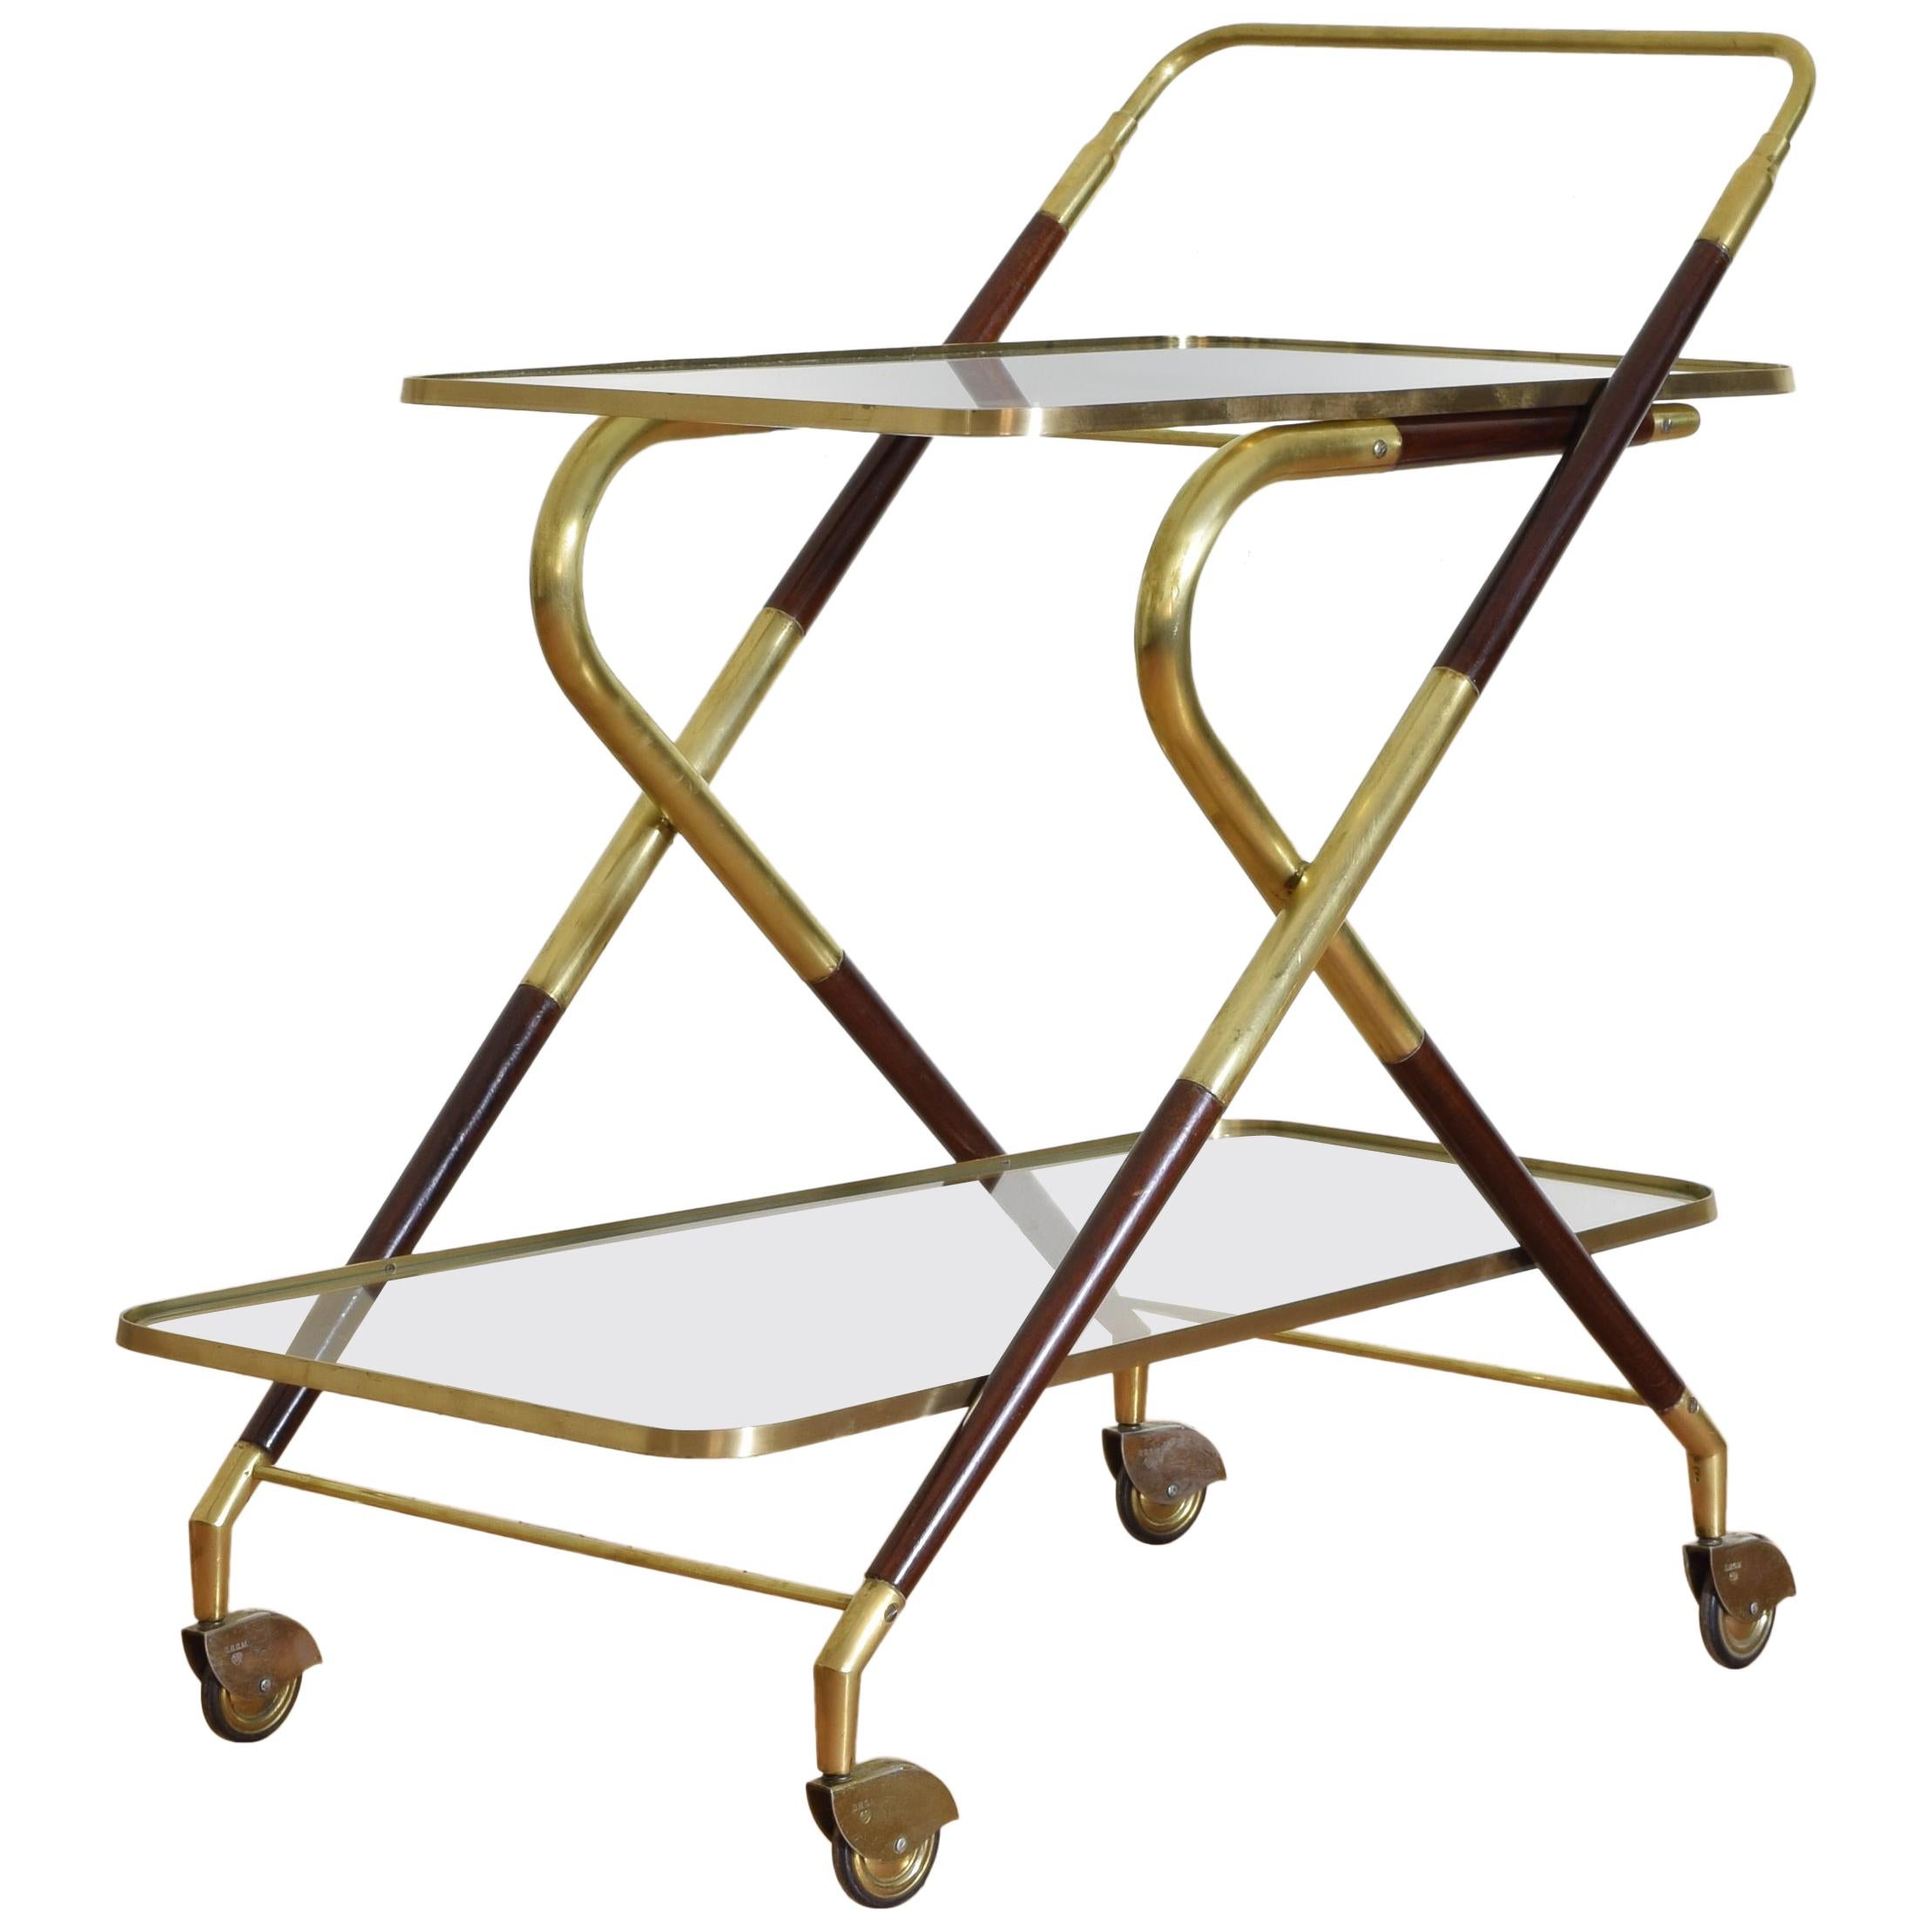 Mid-20th century Brass, Rosewood and Glass Bar Cart on Casters